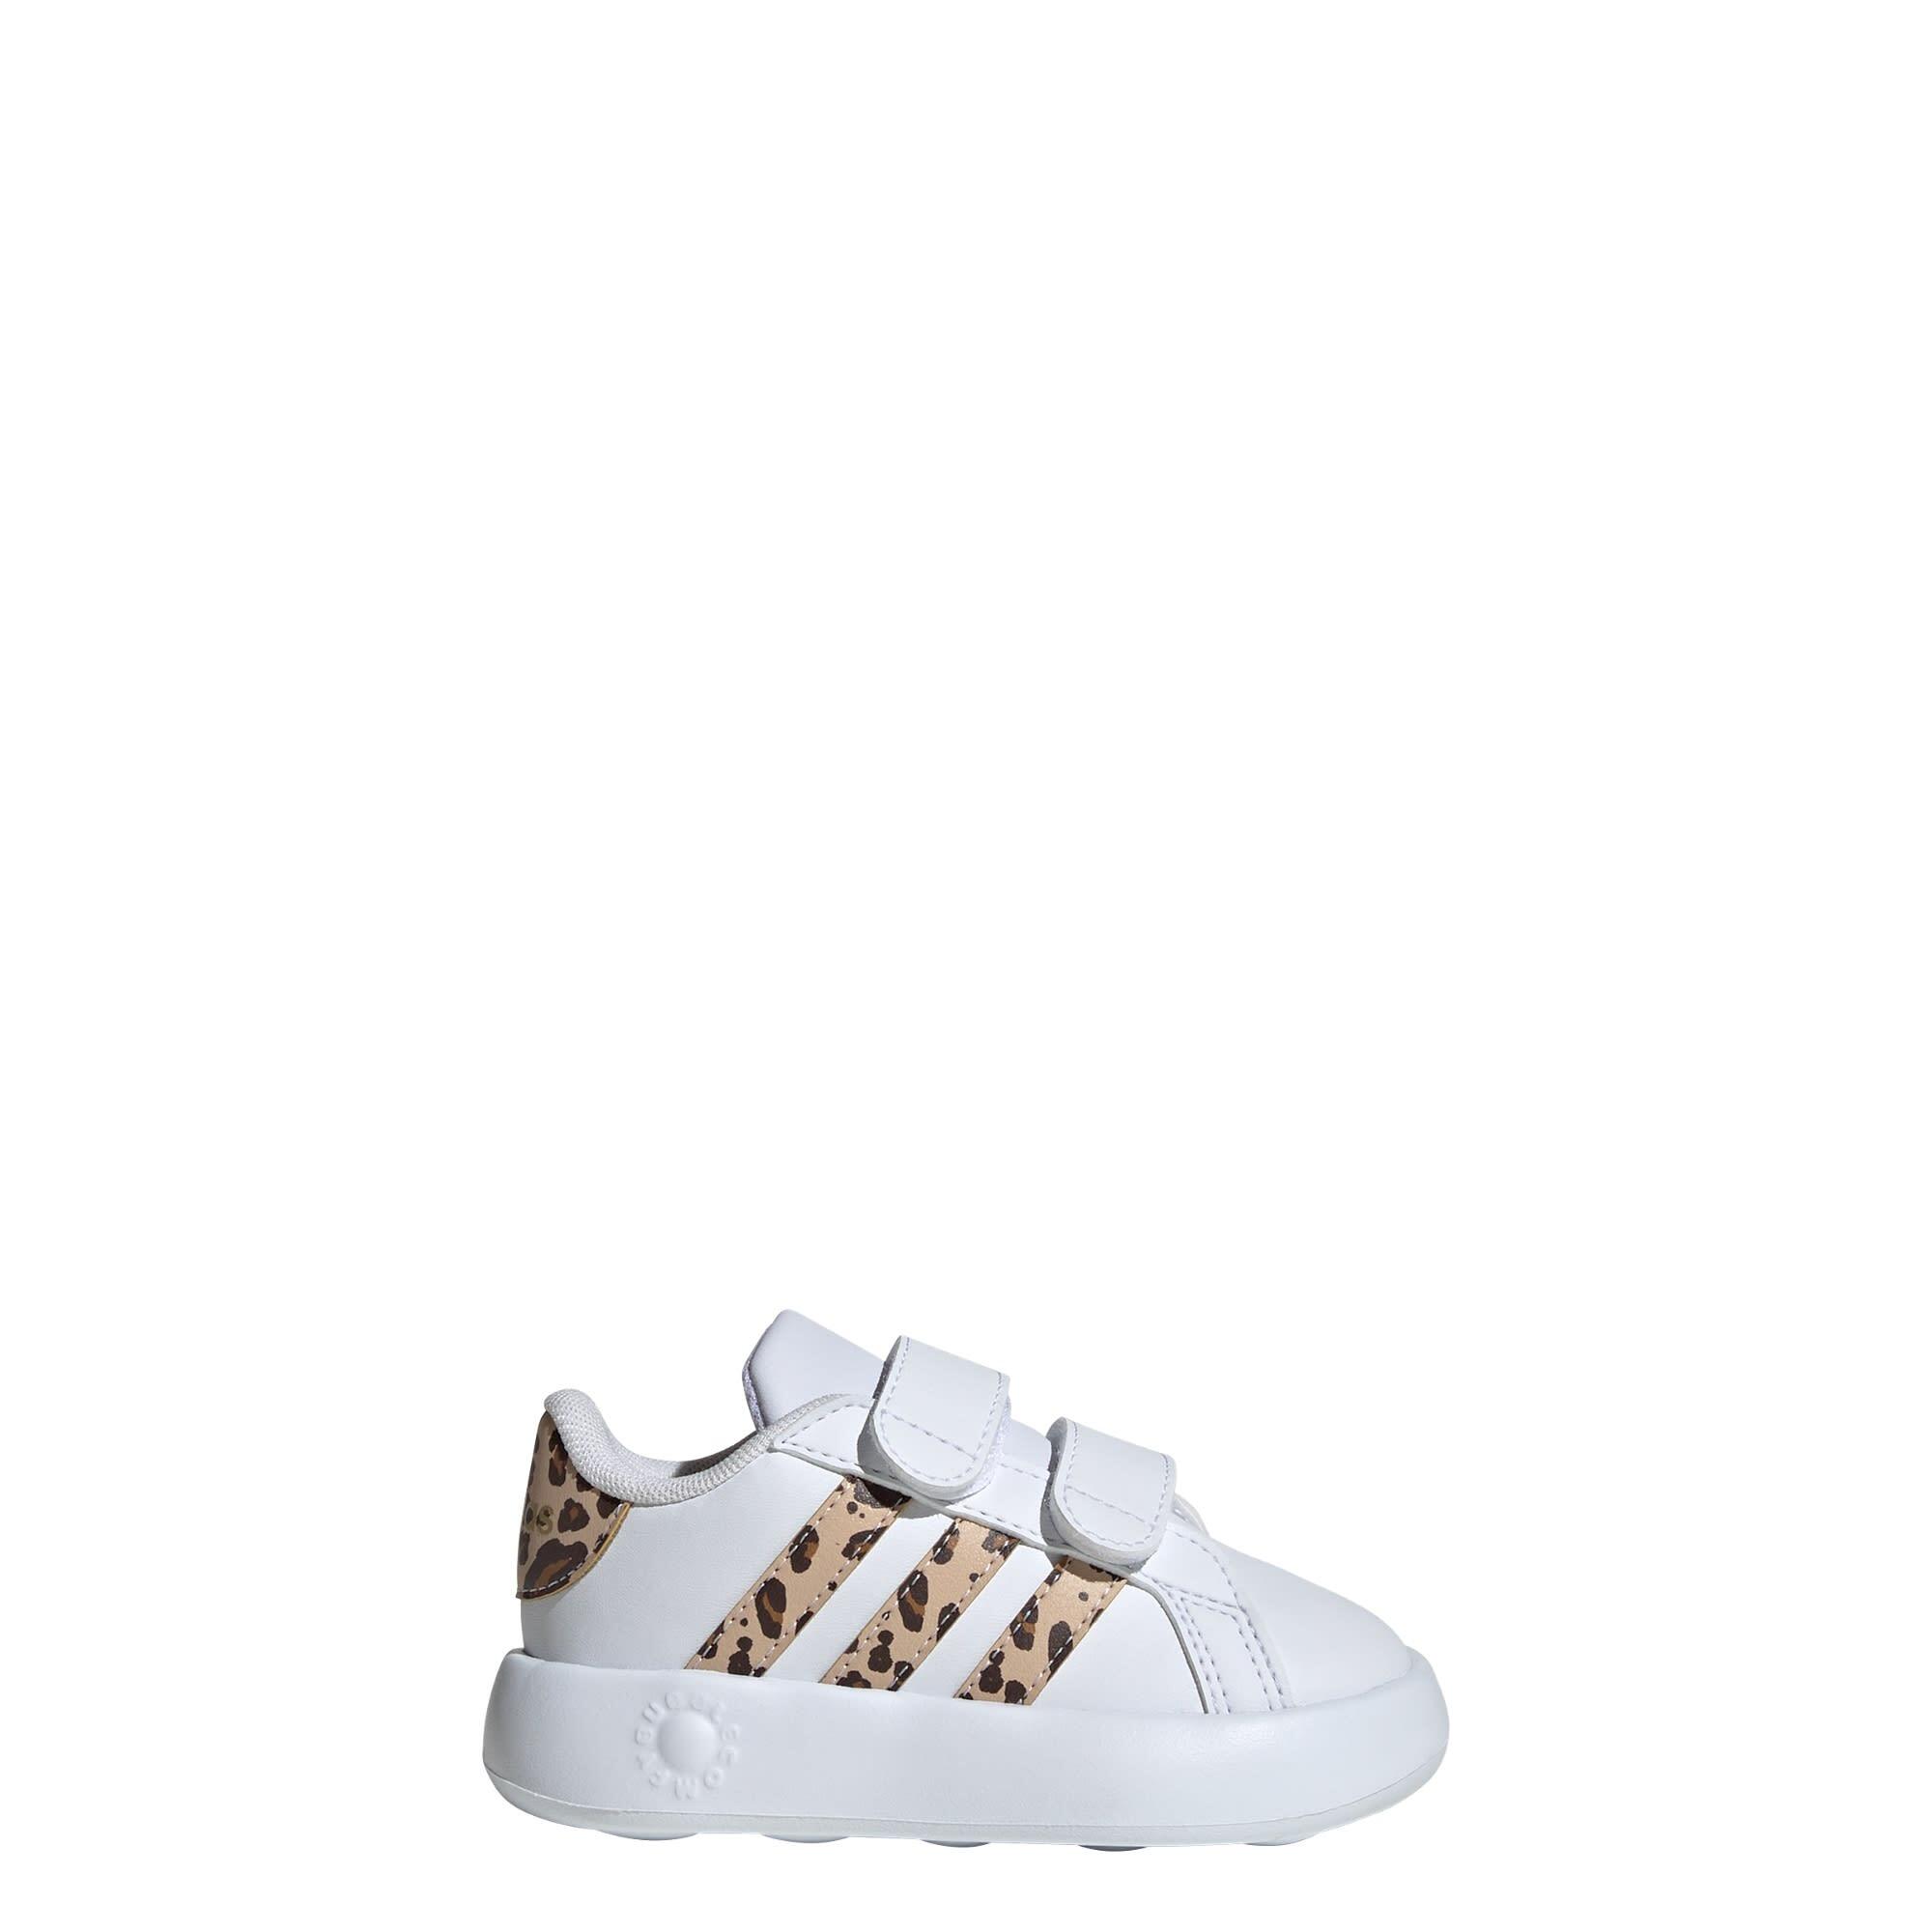 ADIDAS Grand Court 2.0 Shoes Kids